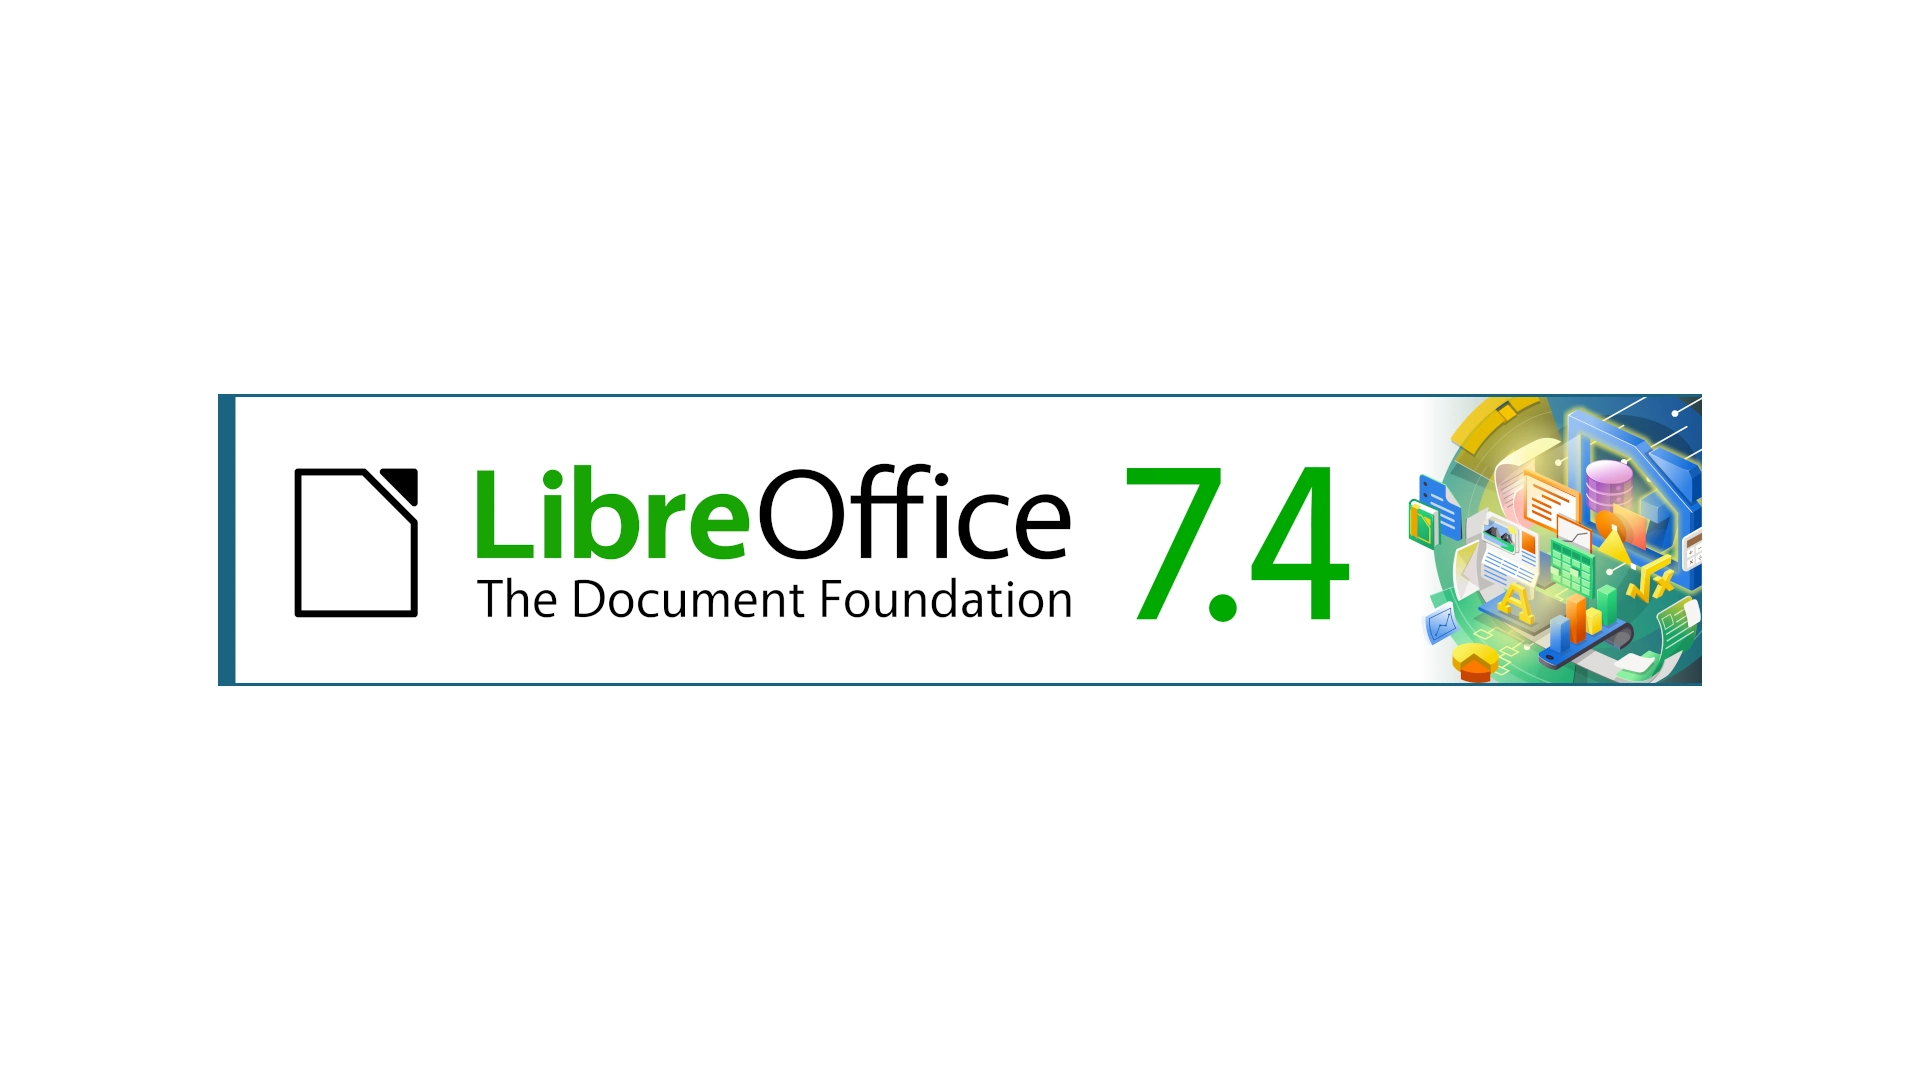 LibreOffice 7.4 Open-Source Office Suite Officially Released, This Is What’s New